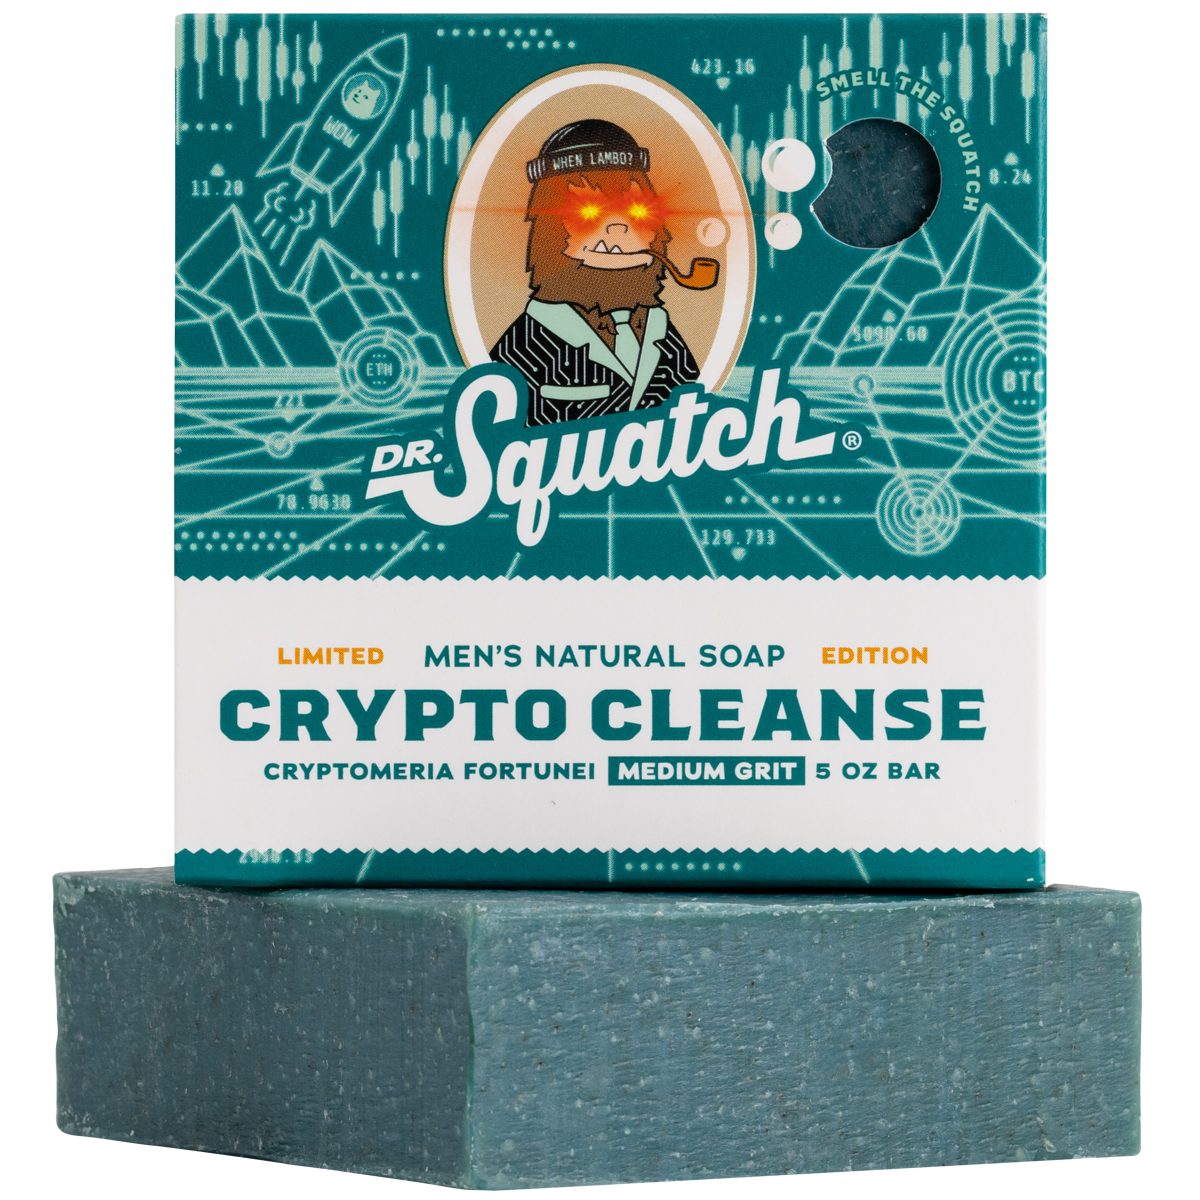 Crypto cleanse smells better than I thought 👍🏻 : r/DrSquatch